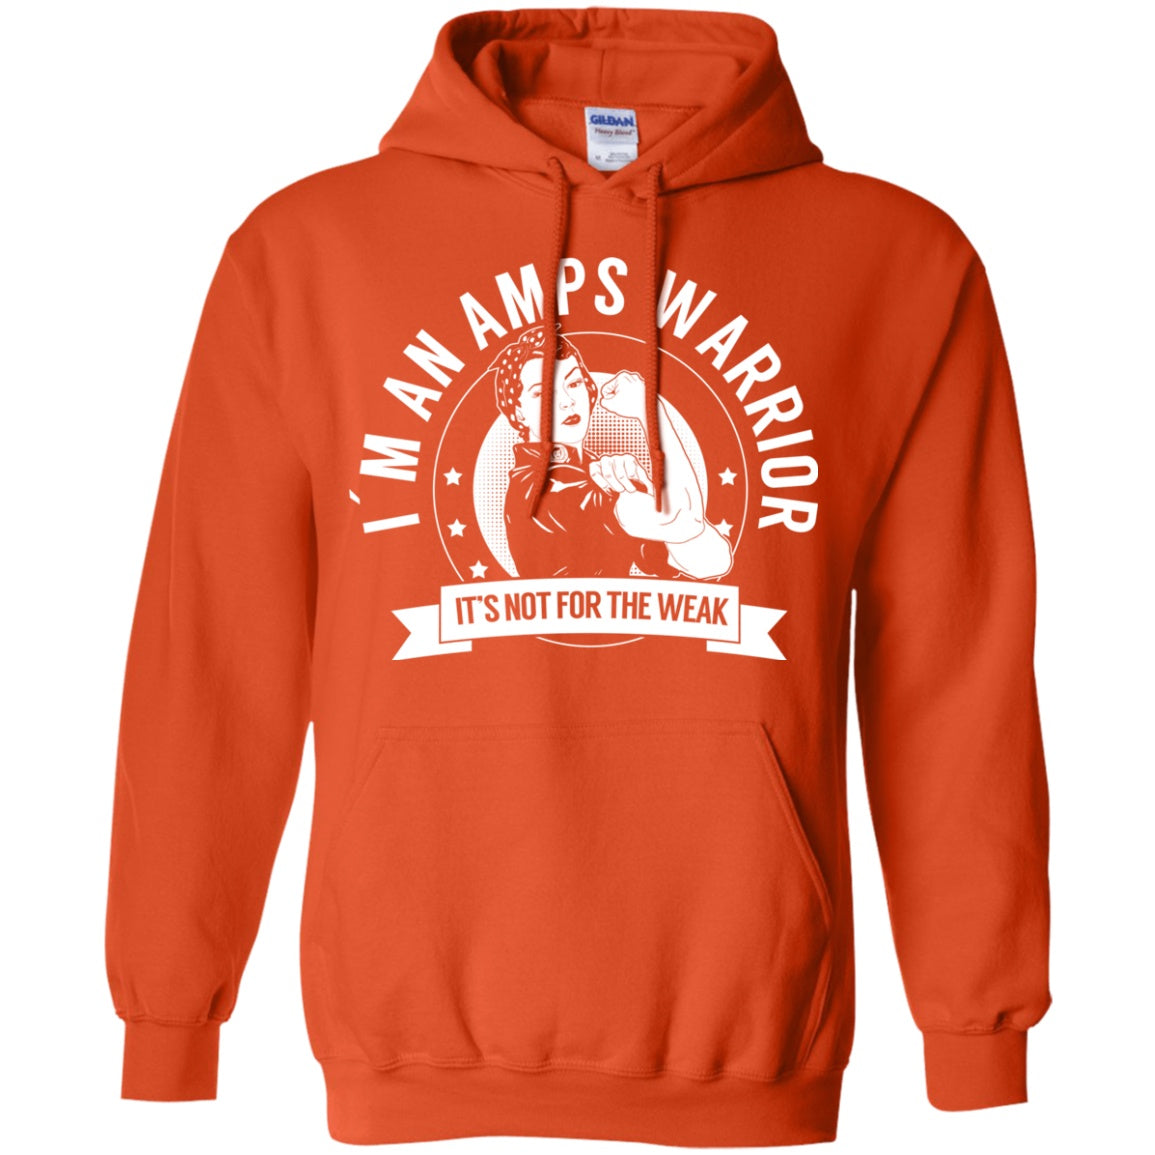 Amplified Musculoskeletal Pain Syndrome - AMPS Warrior NFTW Pullover Hoodie 8 oz. - The Unchargeables